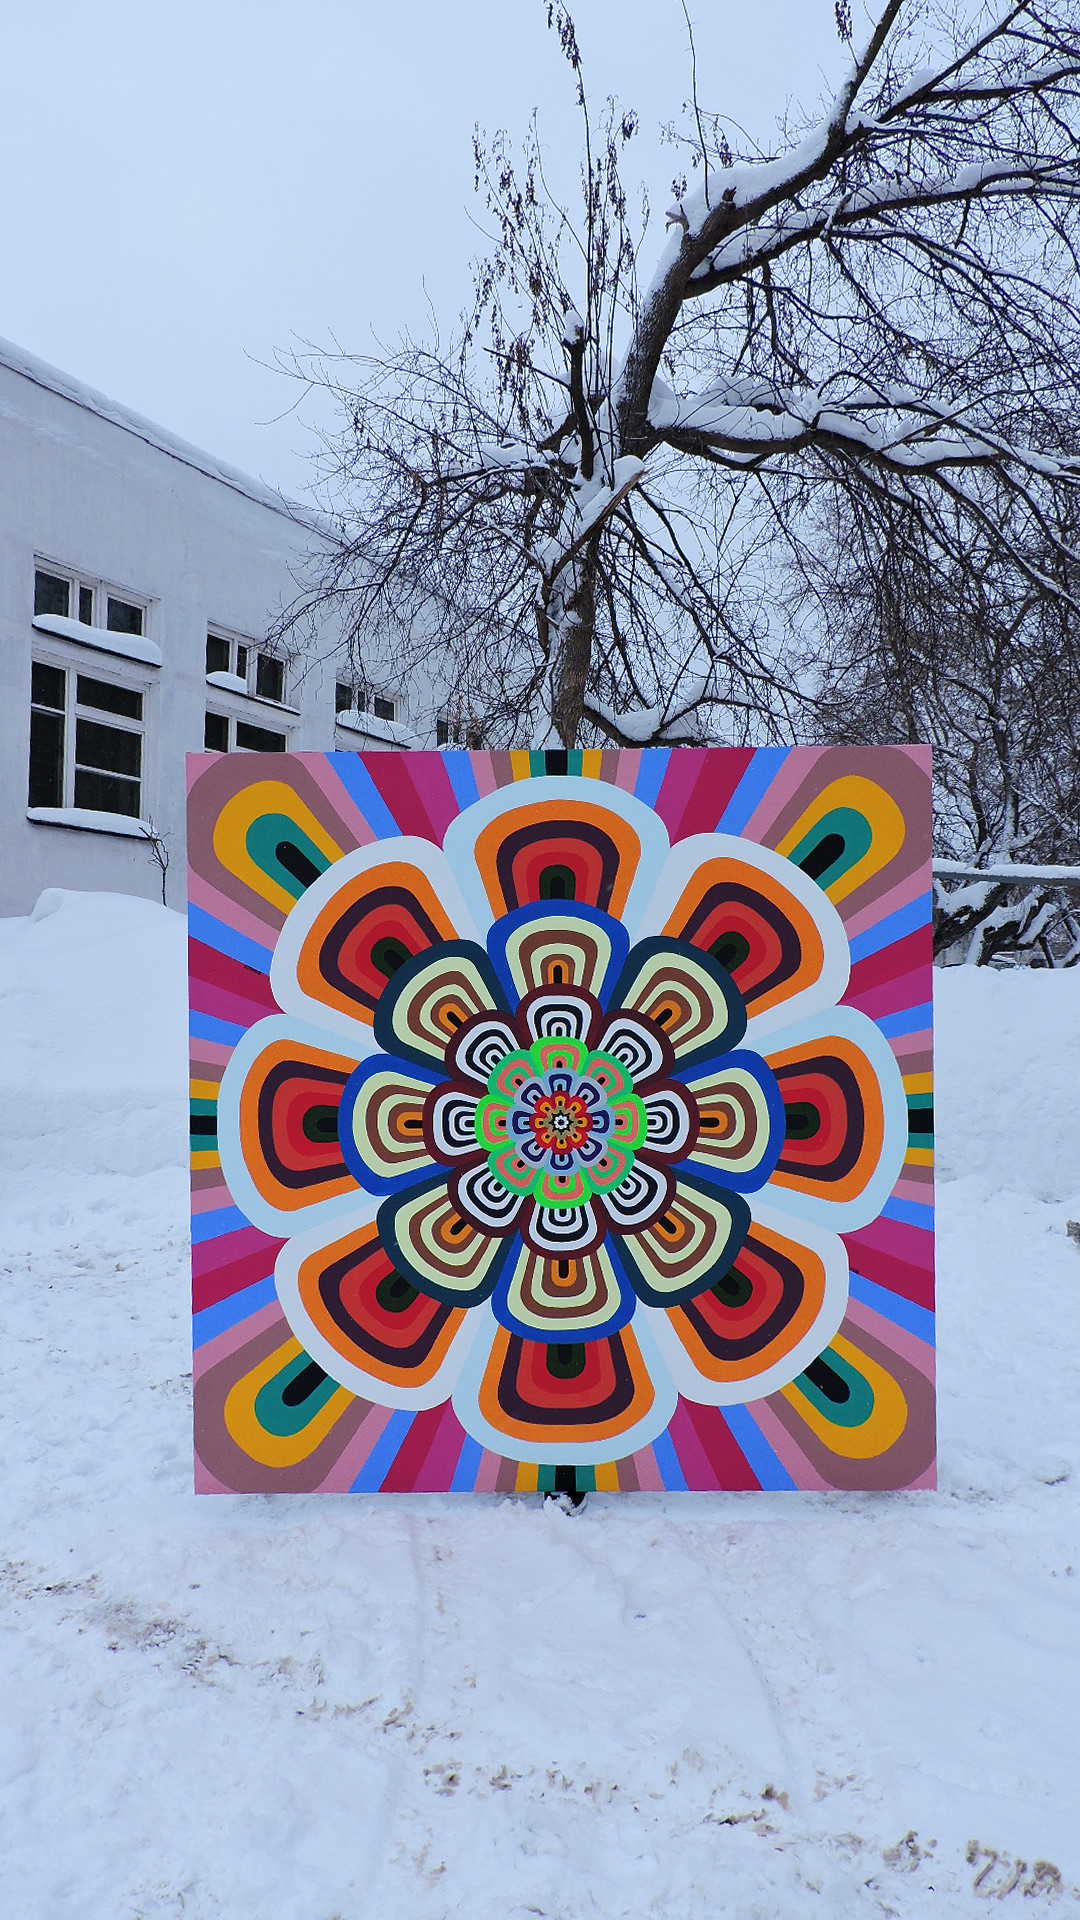 A huge picture on canvas with the image of mandala